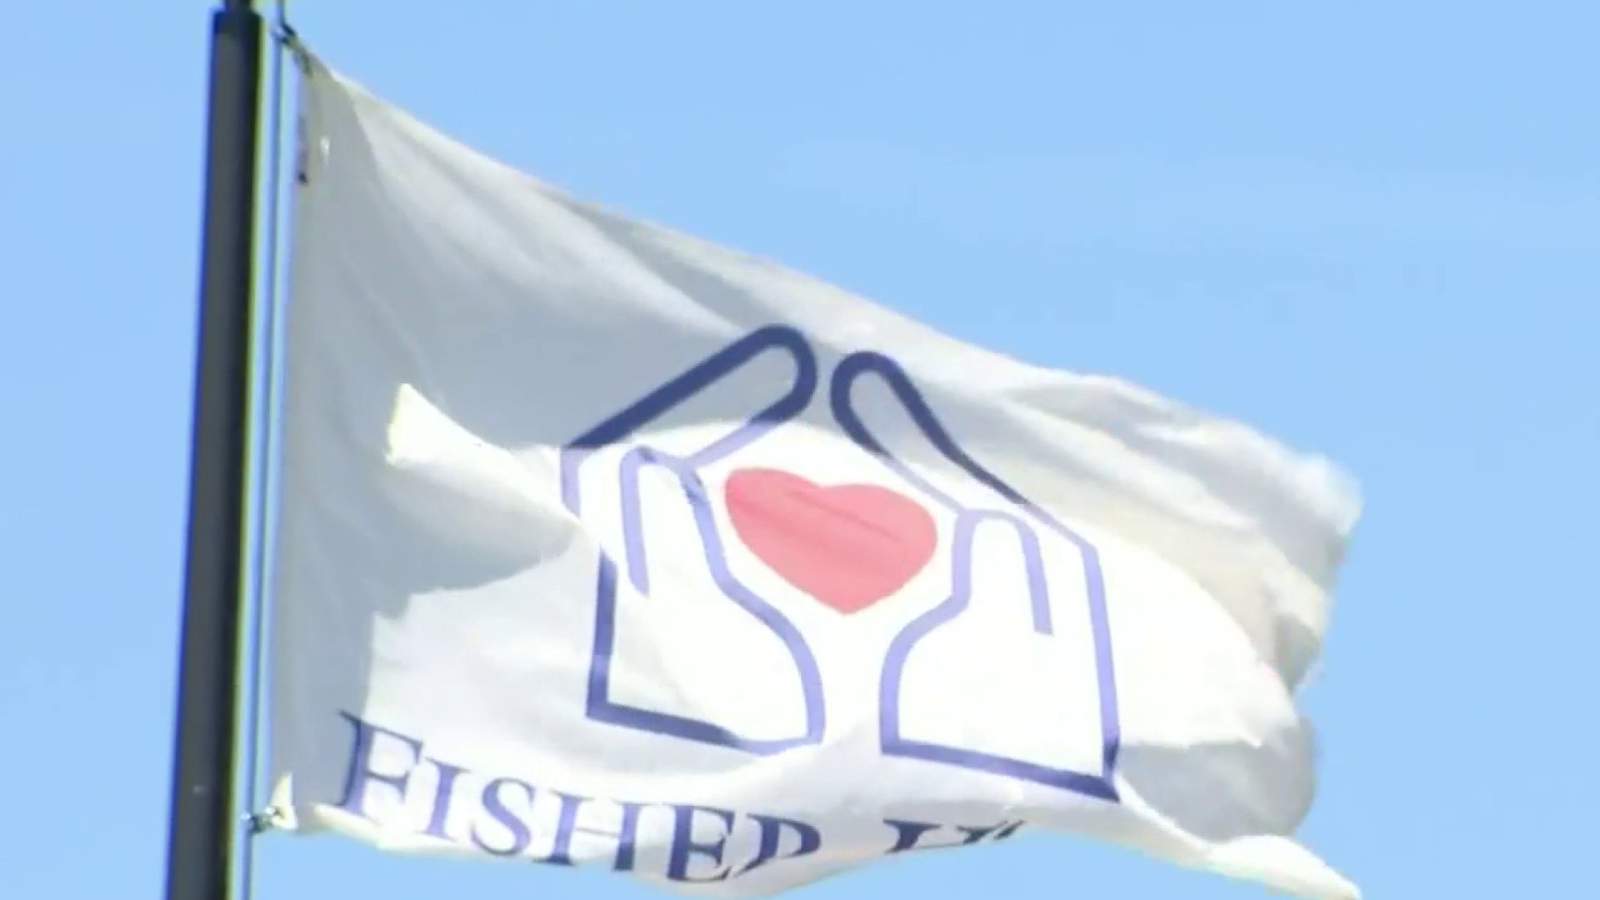 Ann Arbor Fisher House opens to support veterans families